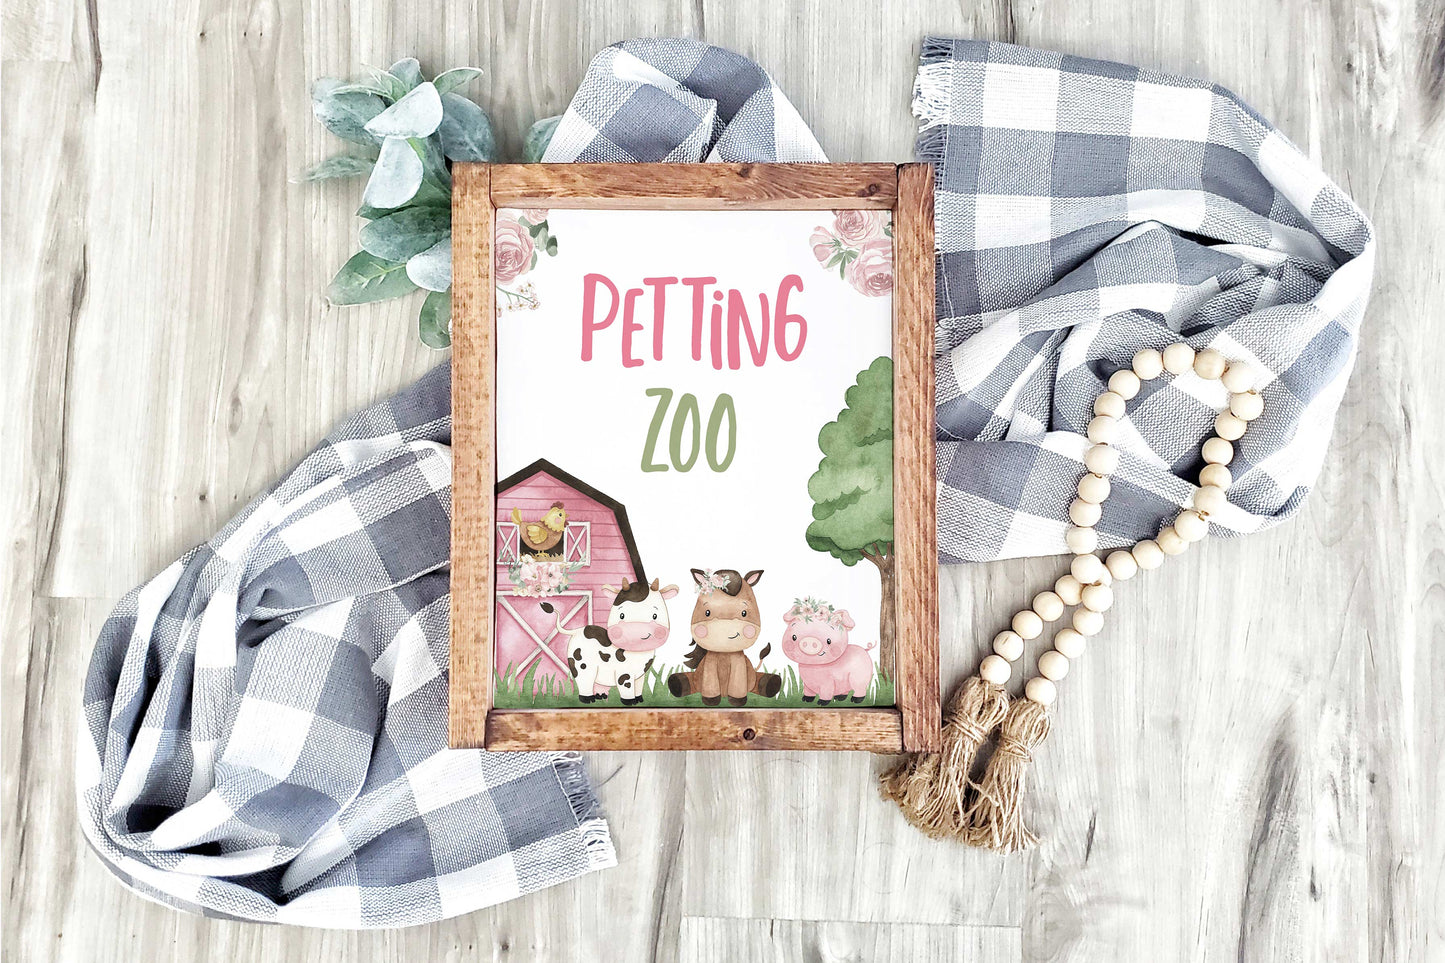 Girl Petting Zoo Sign | Floral Farm Party Decorations - 11A